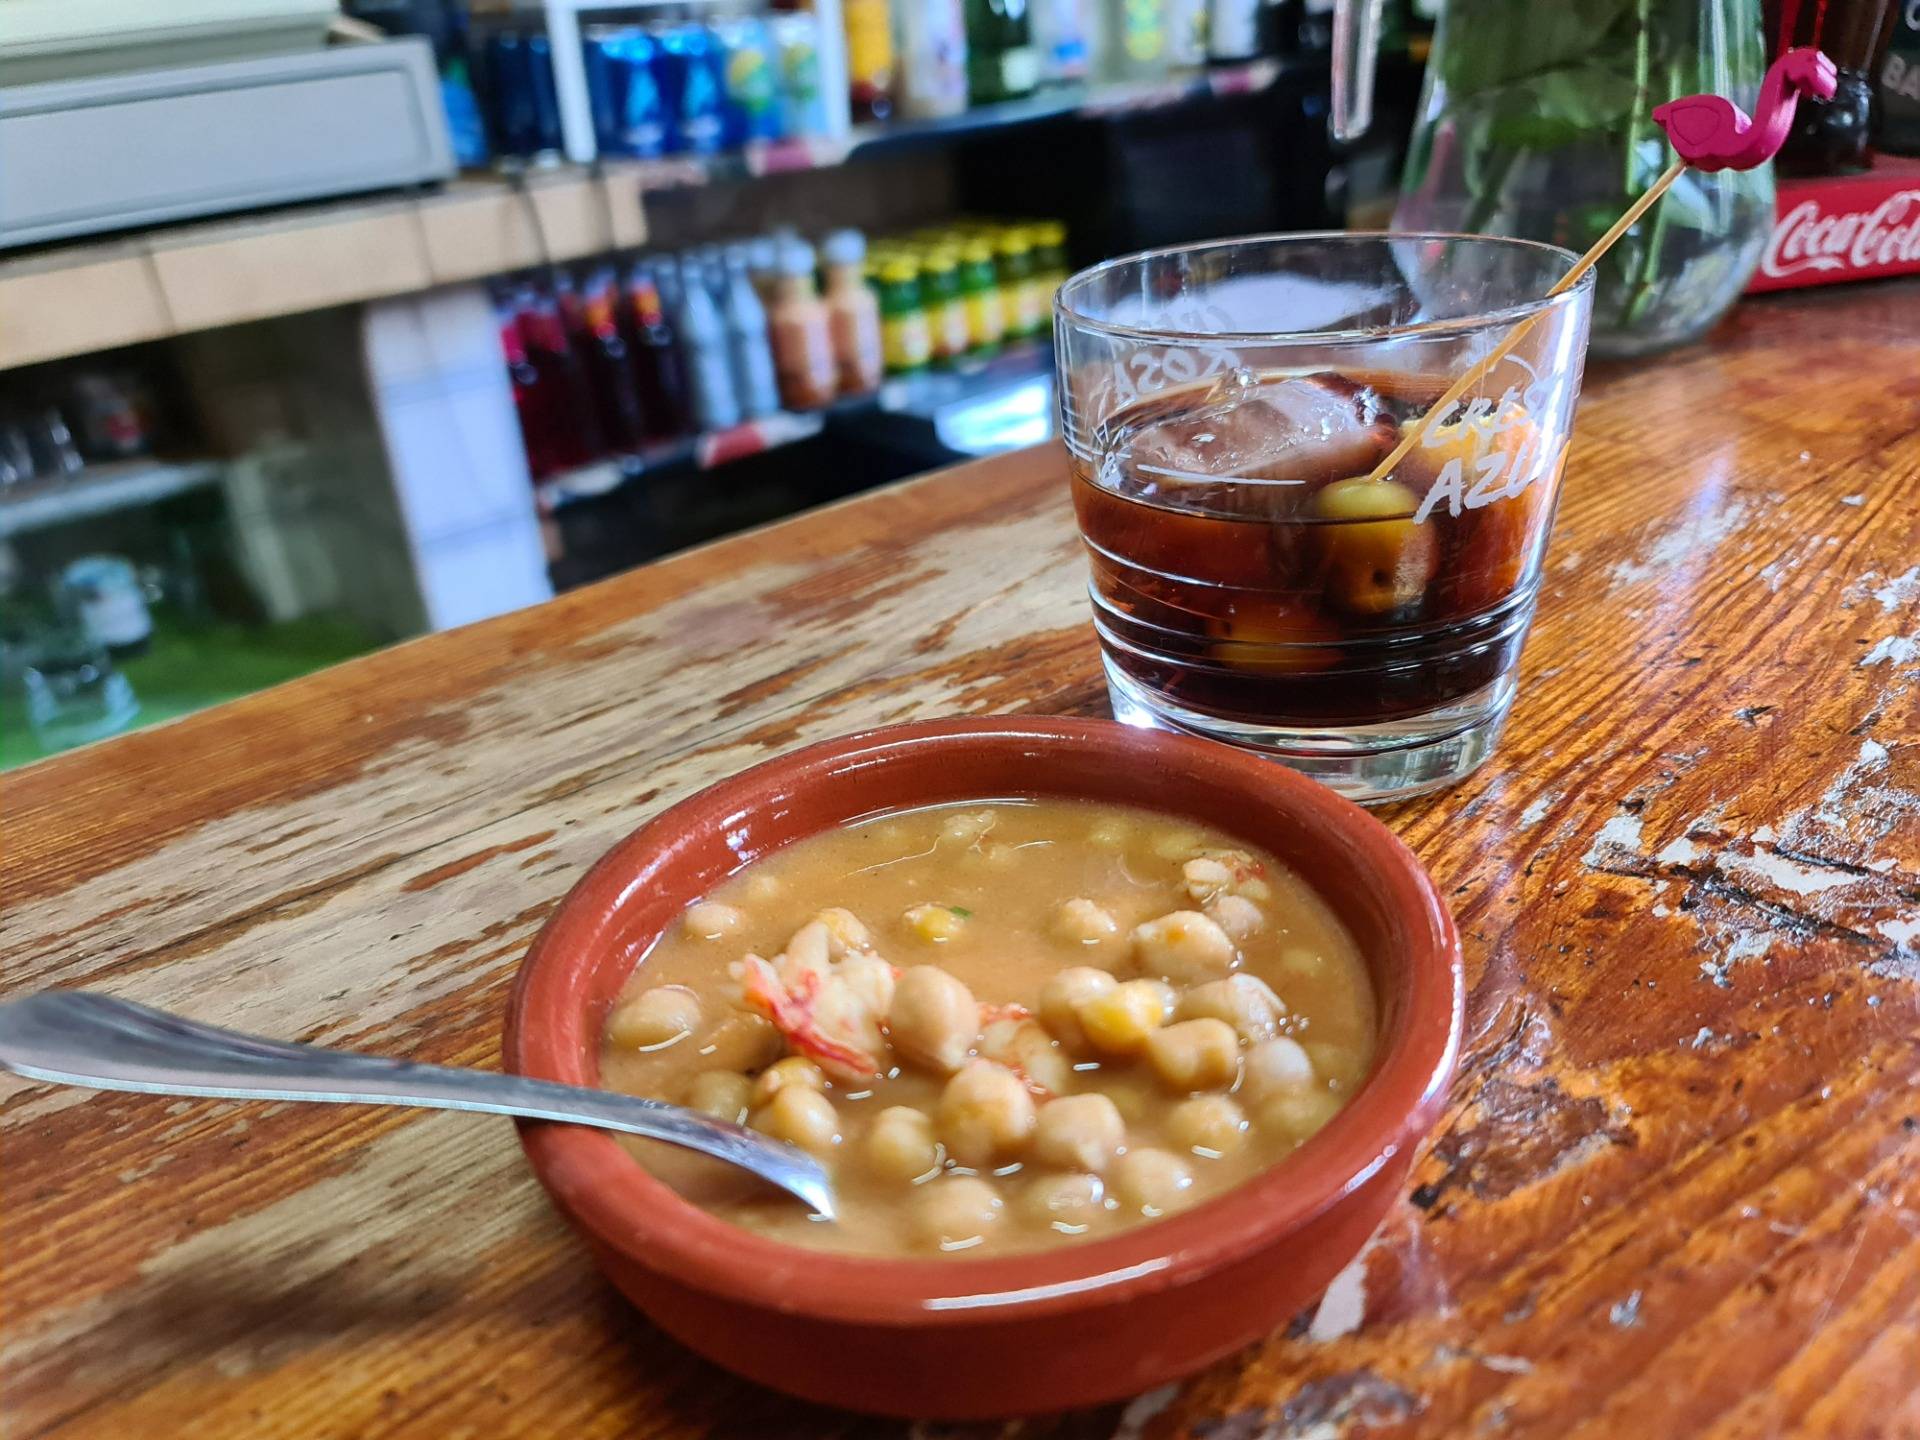 A ”Marianito” (name for a small glass of vermouth to drink together with some tapa) of homemade vermouth, sided with a prawns and chickpeas stew tapa (€2.50, tapa on the house).